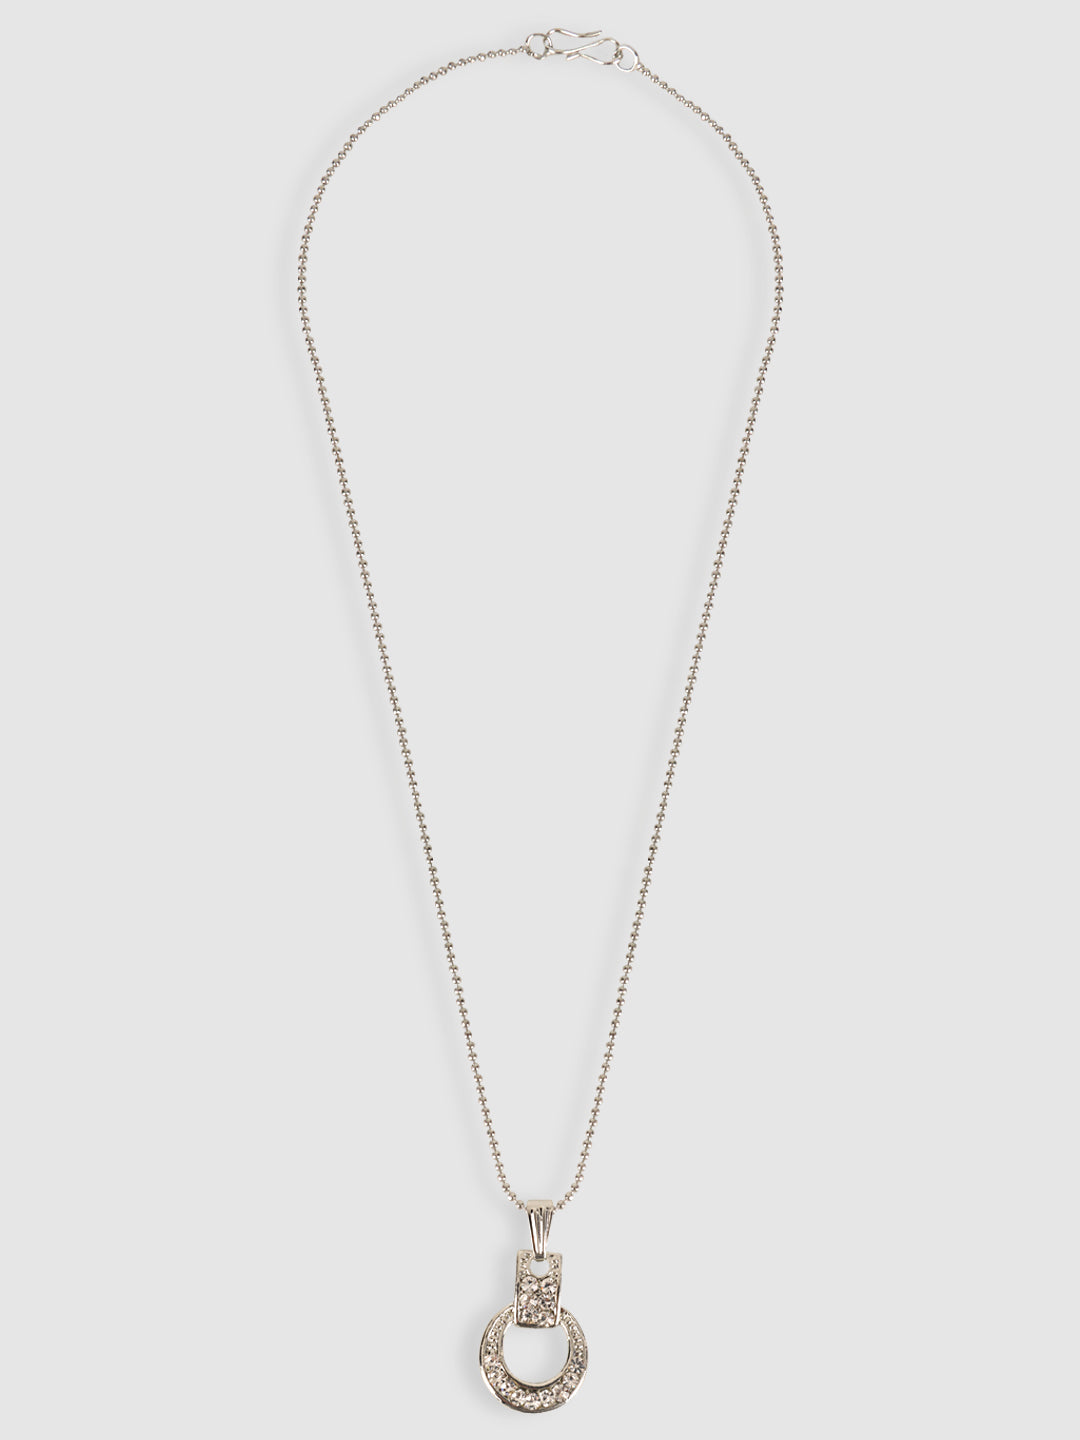 Rhodium-Plated Silver-Toned Studded Pendant With Chain